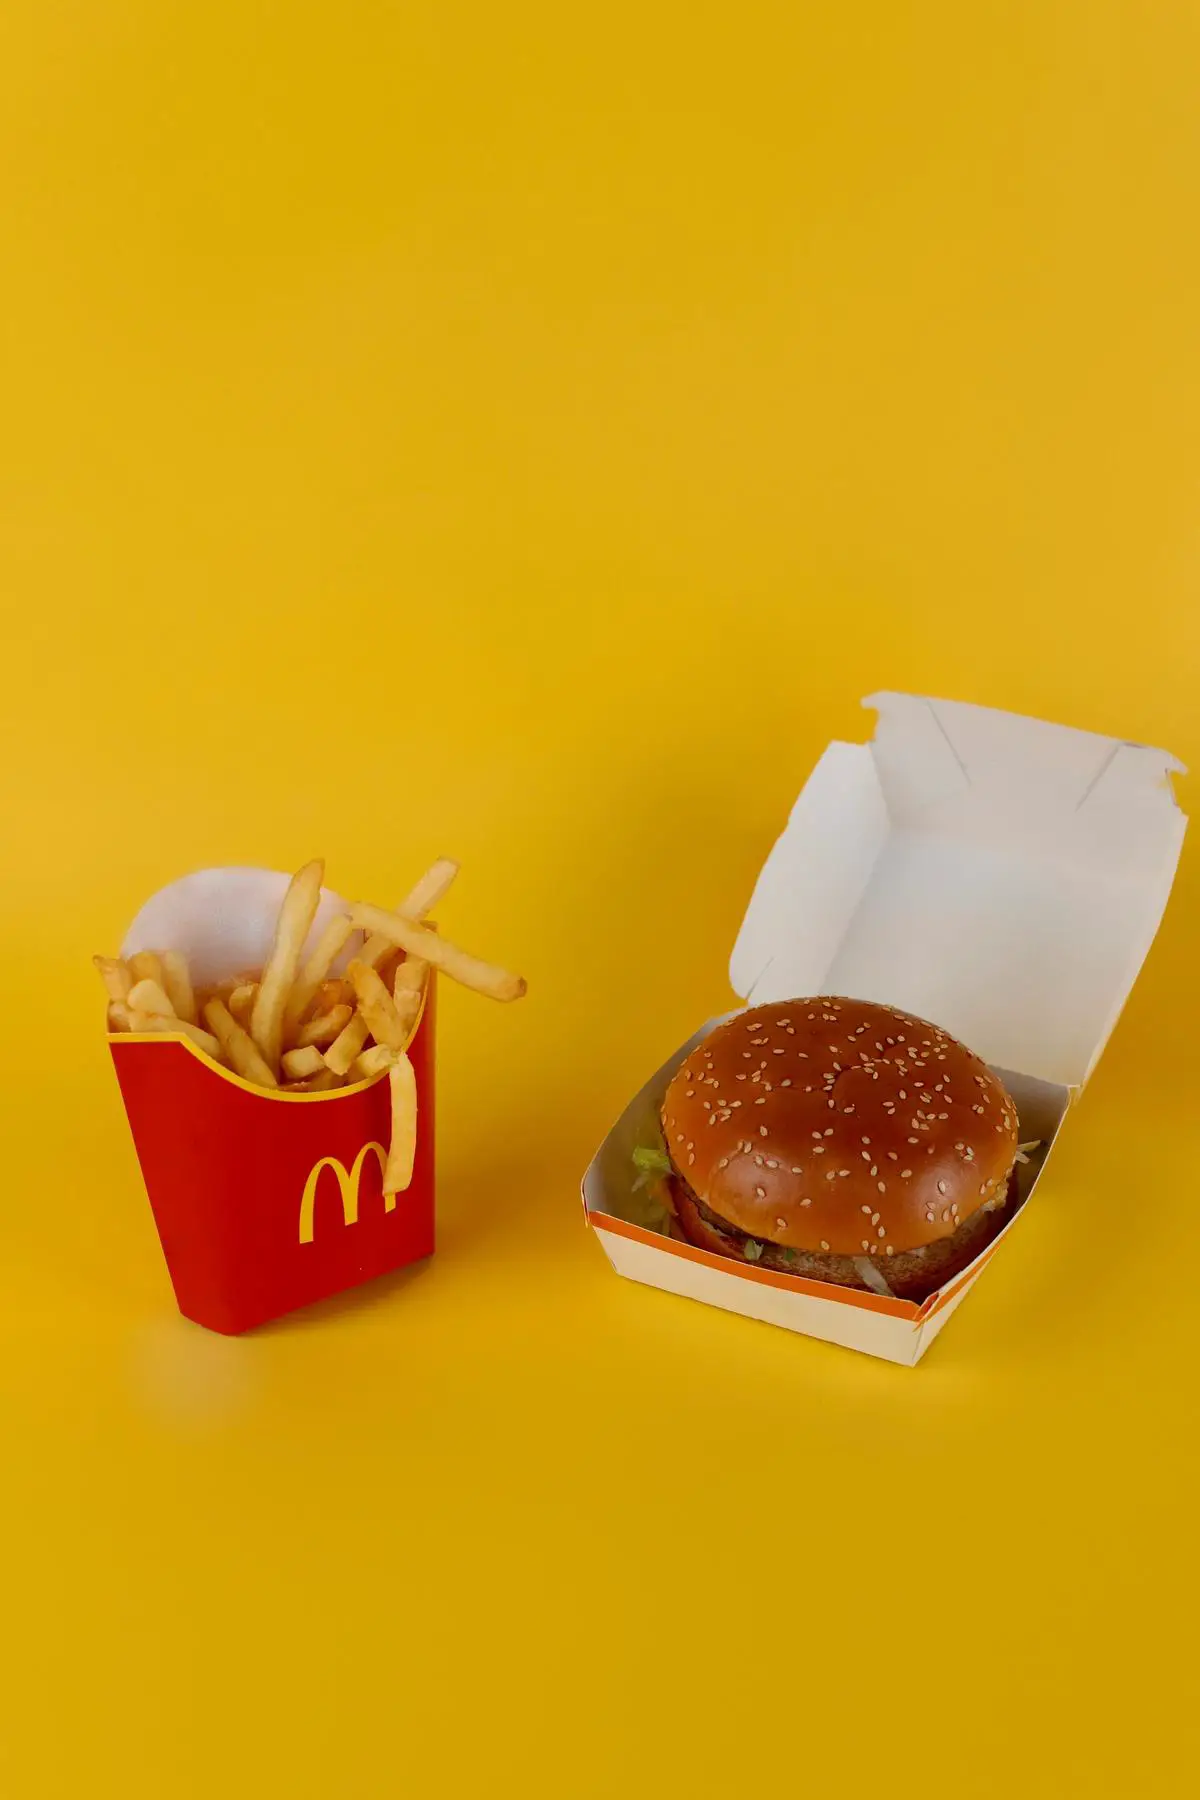 A photo of the McDonald's Sweden Veggie Tasty Burger next to a traditional McDonald's beef burger, showcasing the similarities in appearance and size.